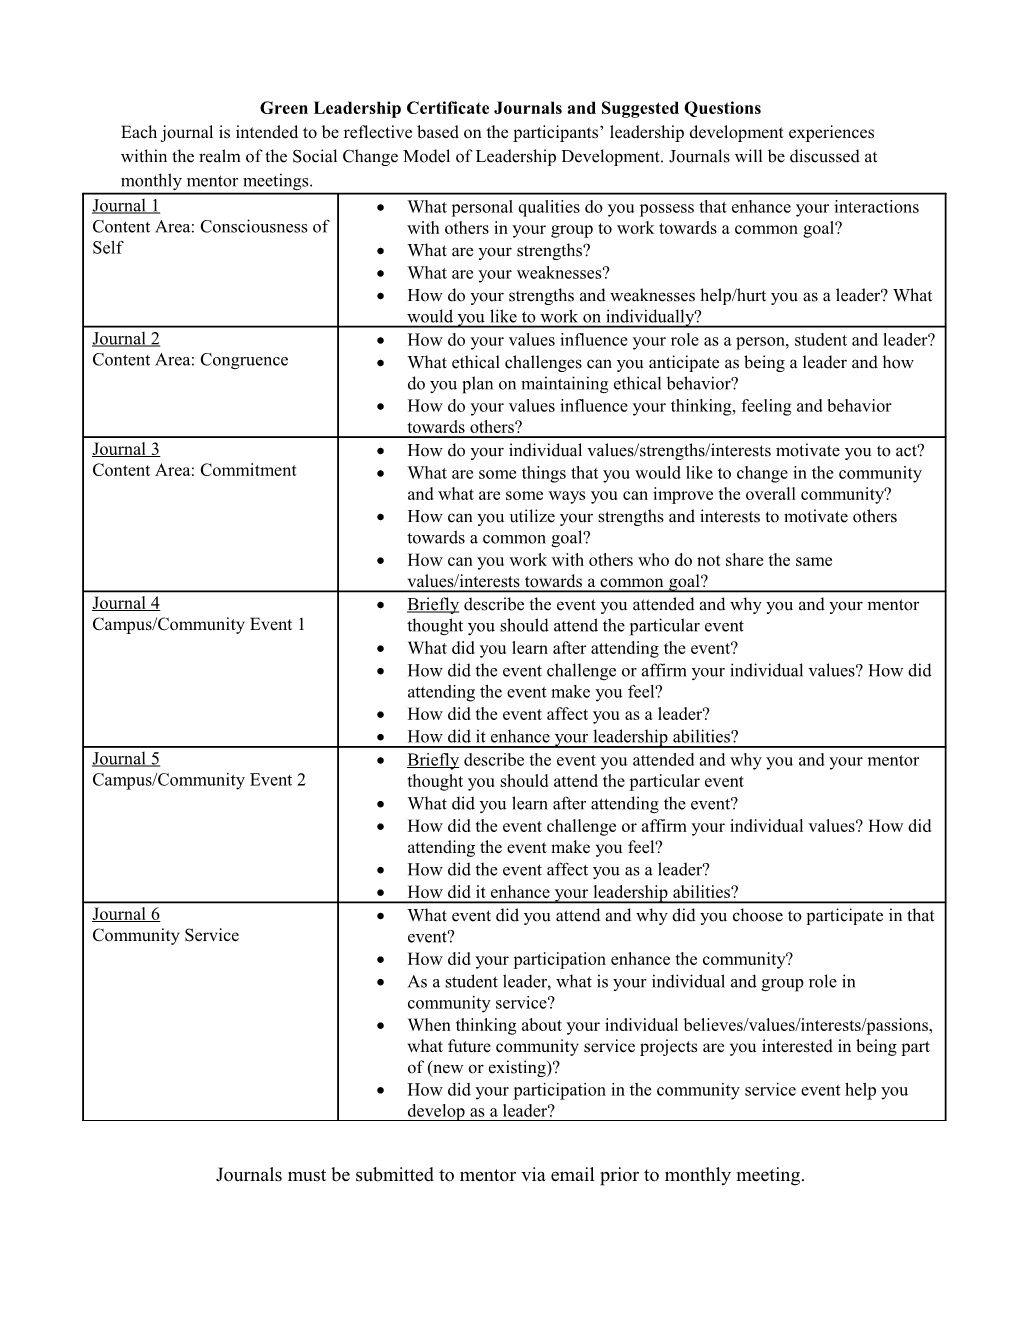 Green Leadership Certificate Journals and Suggested Questions